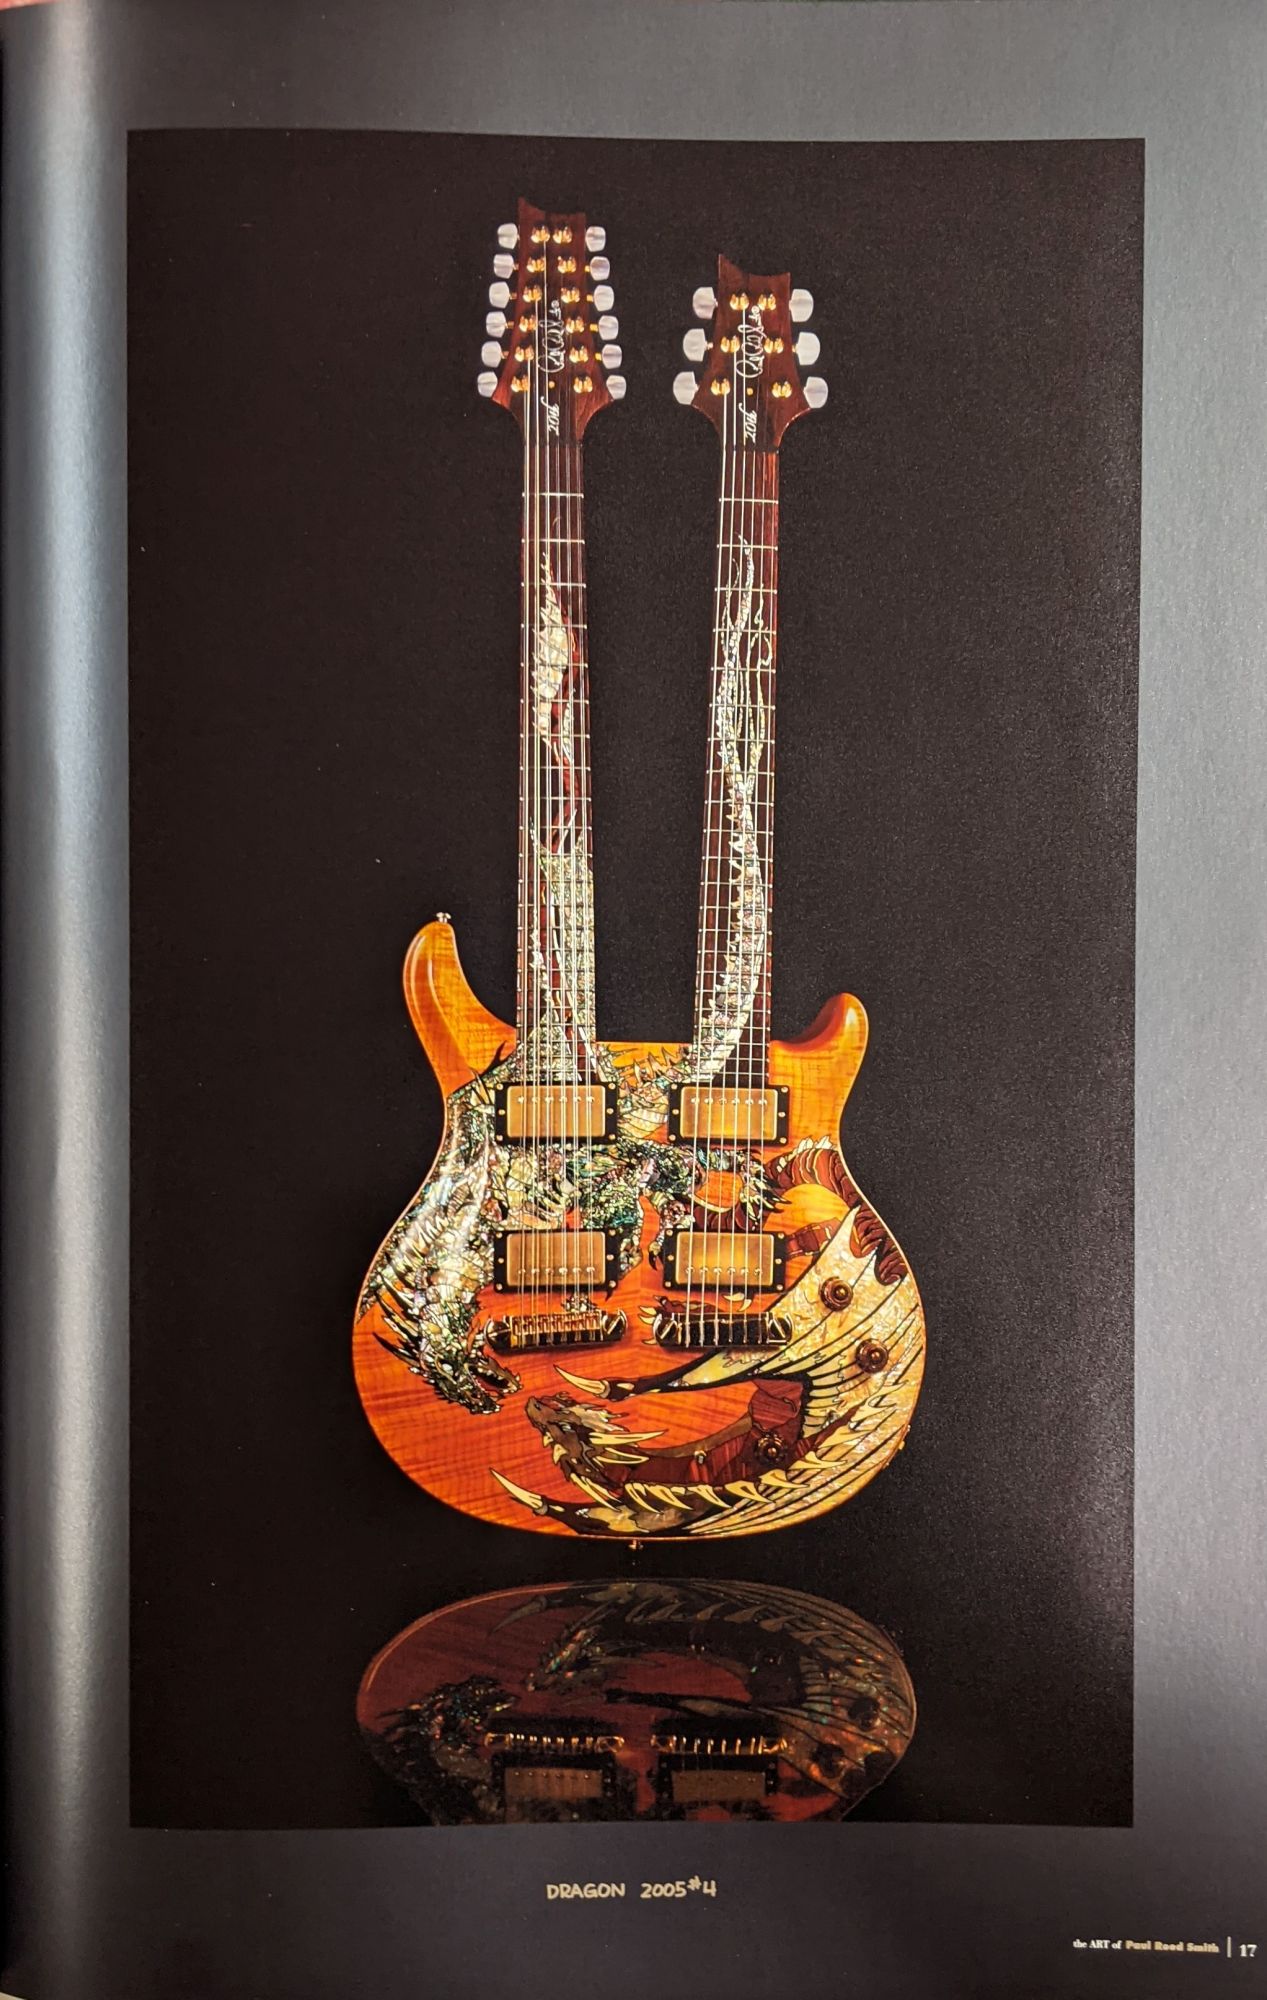 The Art of PRS Paul Reed Smith by Paul Reed Smith on Moe's Books